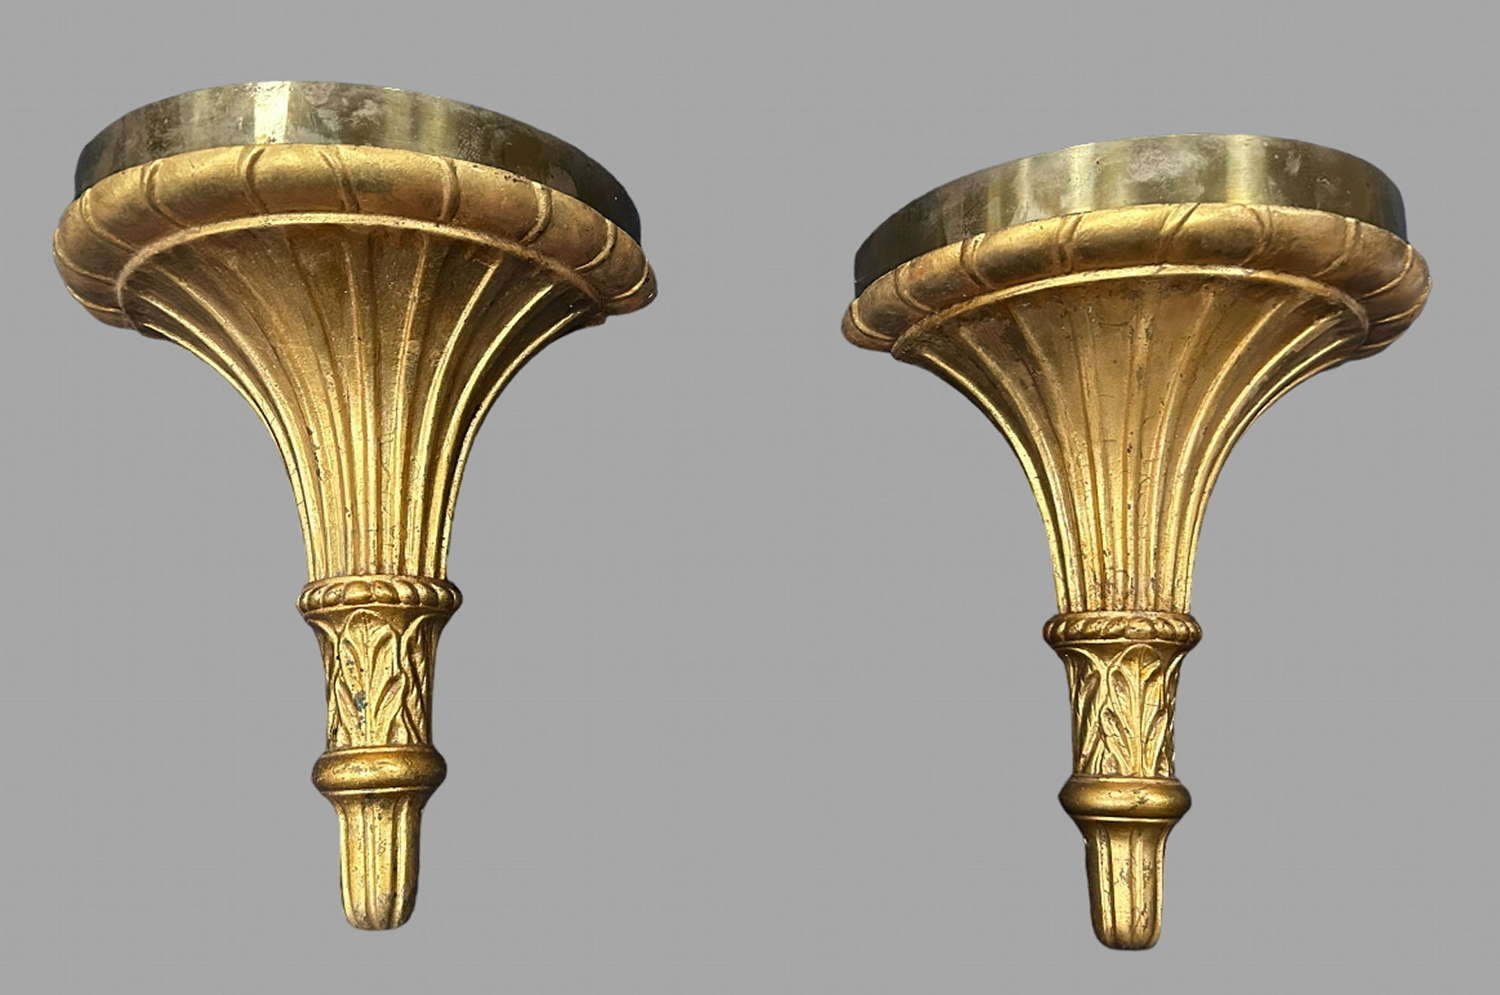 A Pair of Italian 19th Century Wall Brackets with Liners